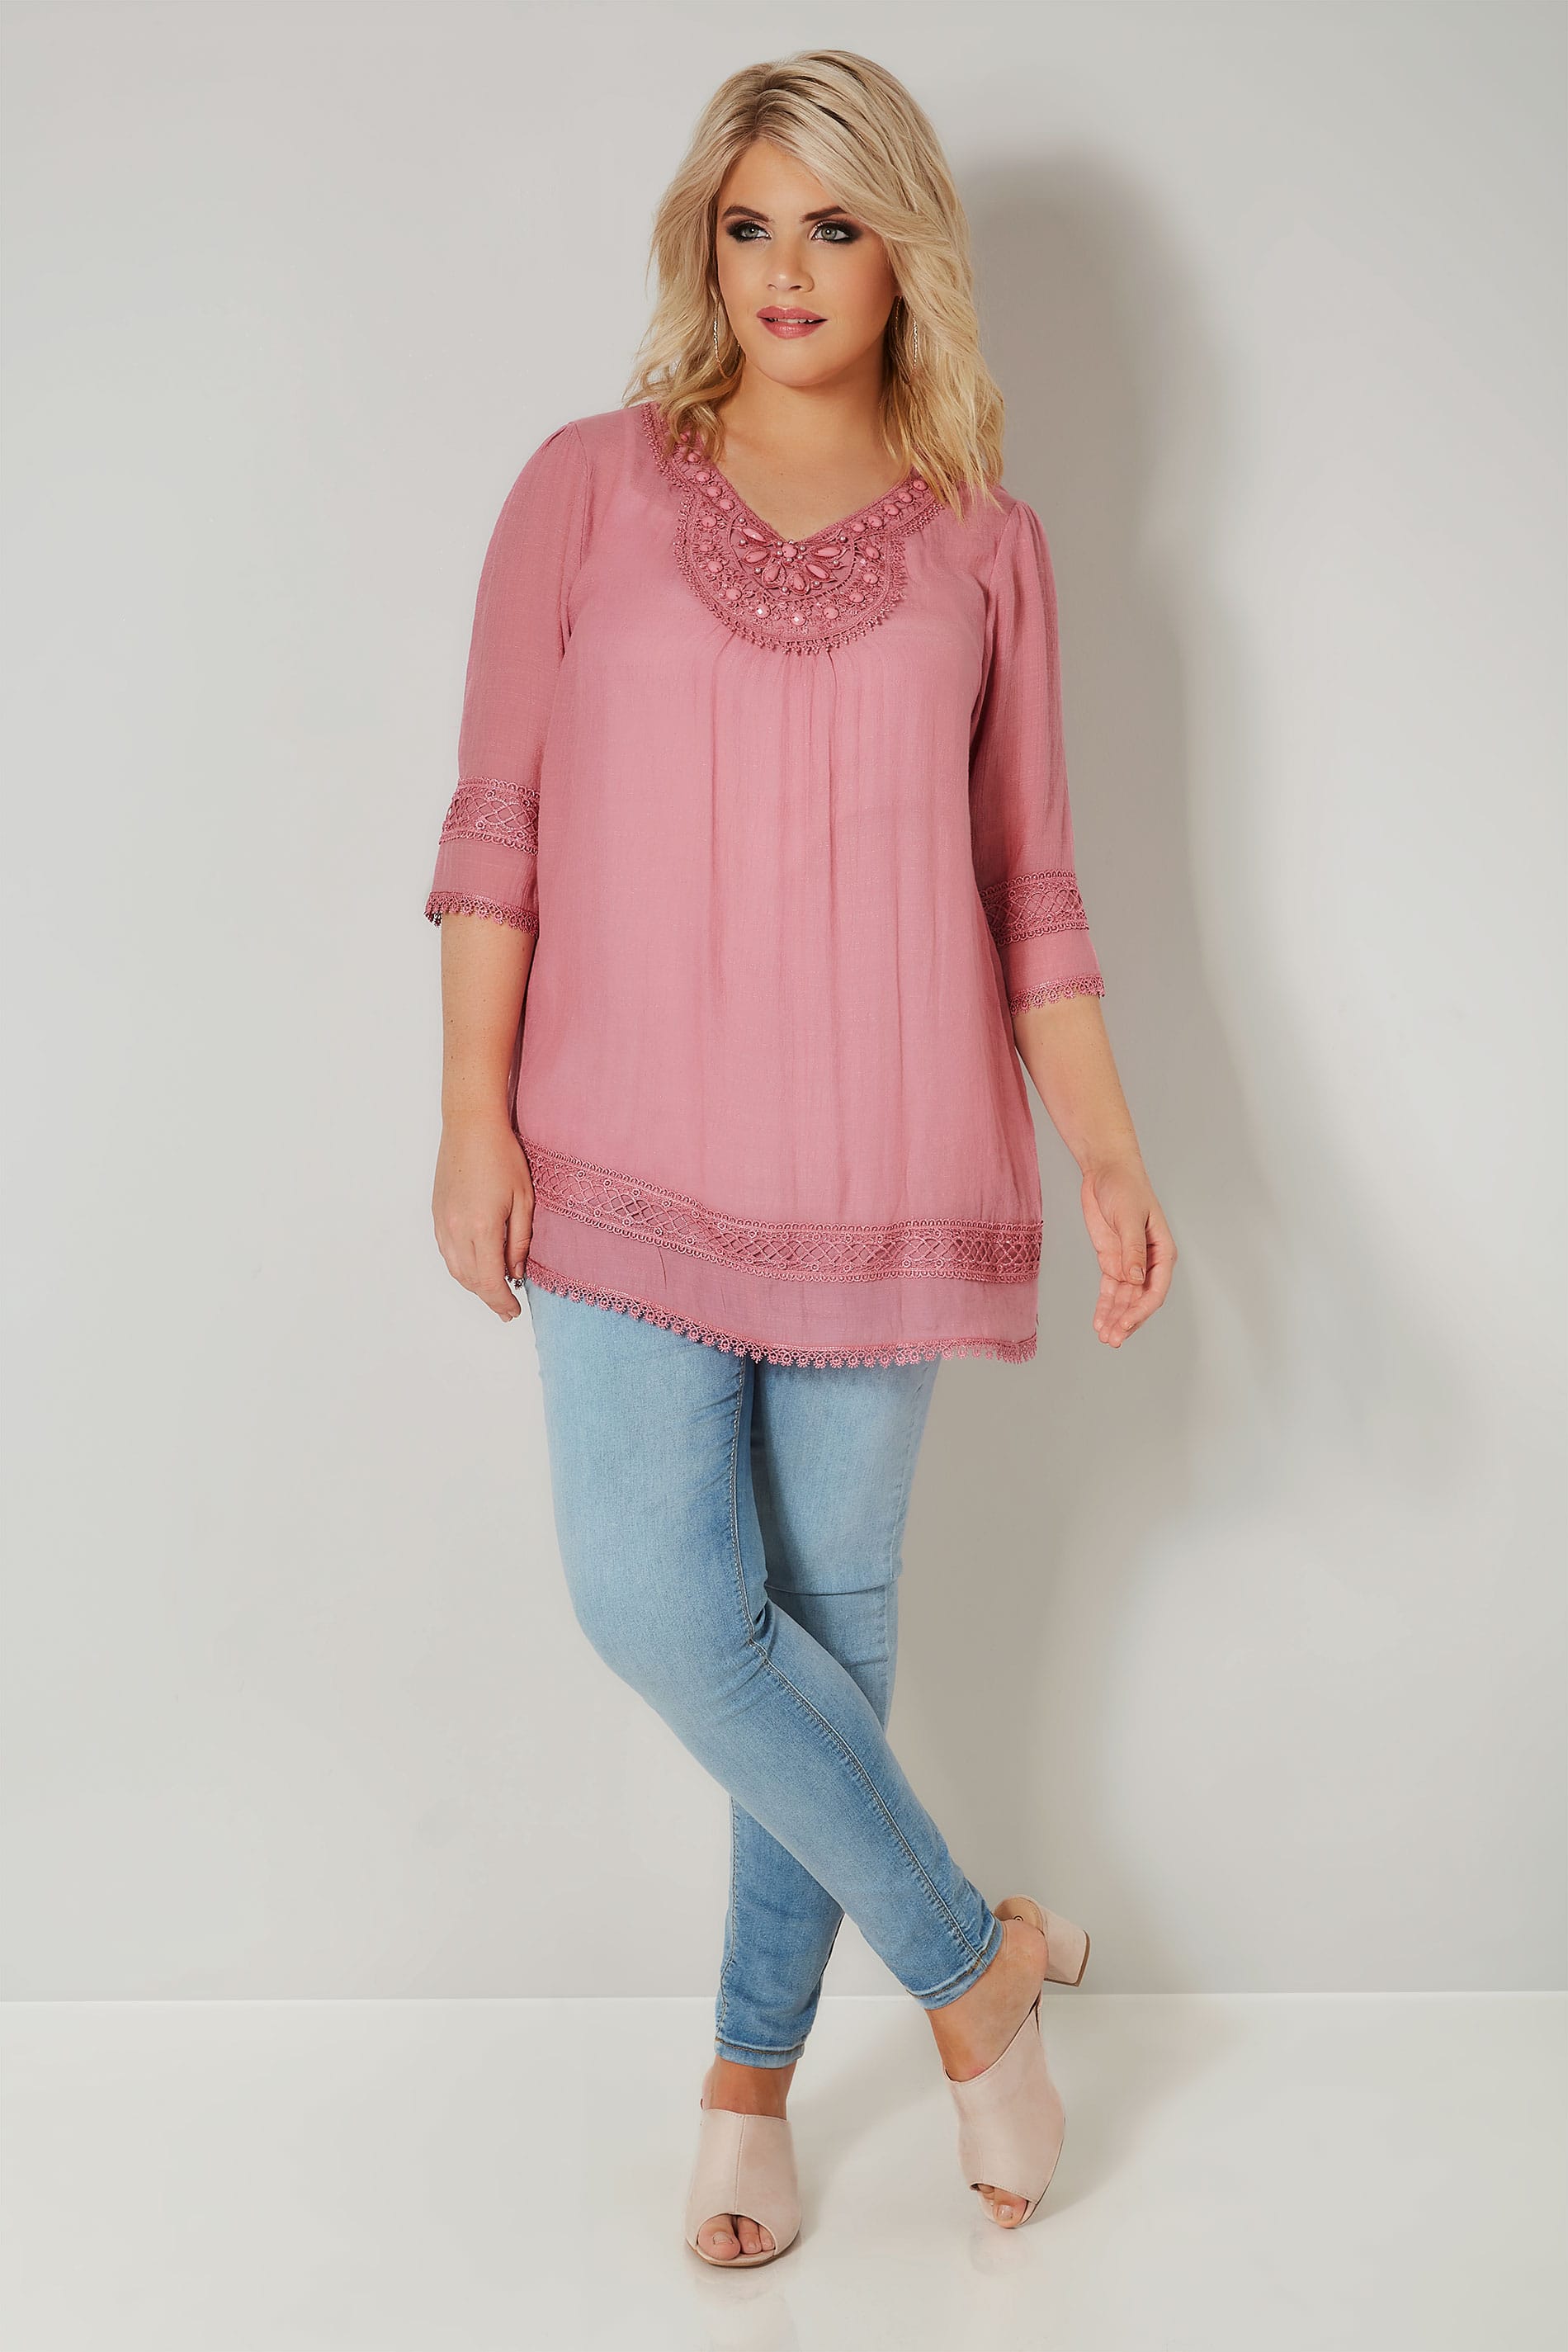 Pink Longline Top With Embellished Neckline & Lace Trim, plus size 16 to 36